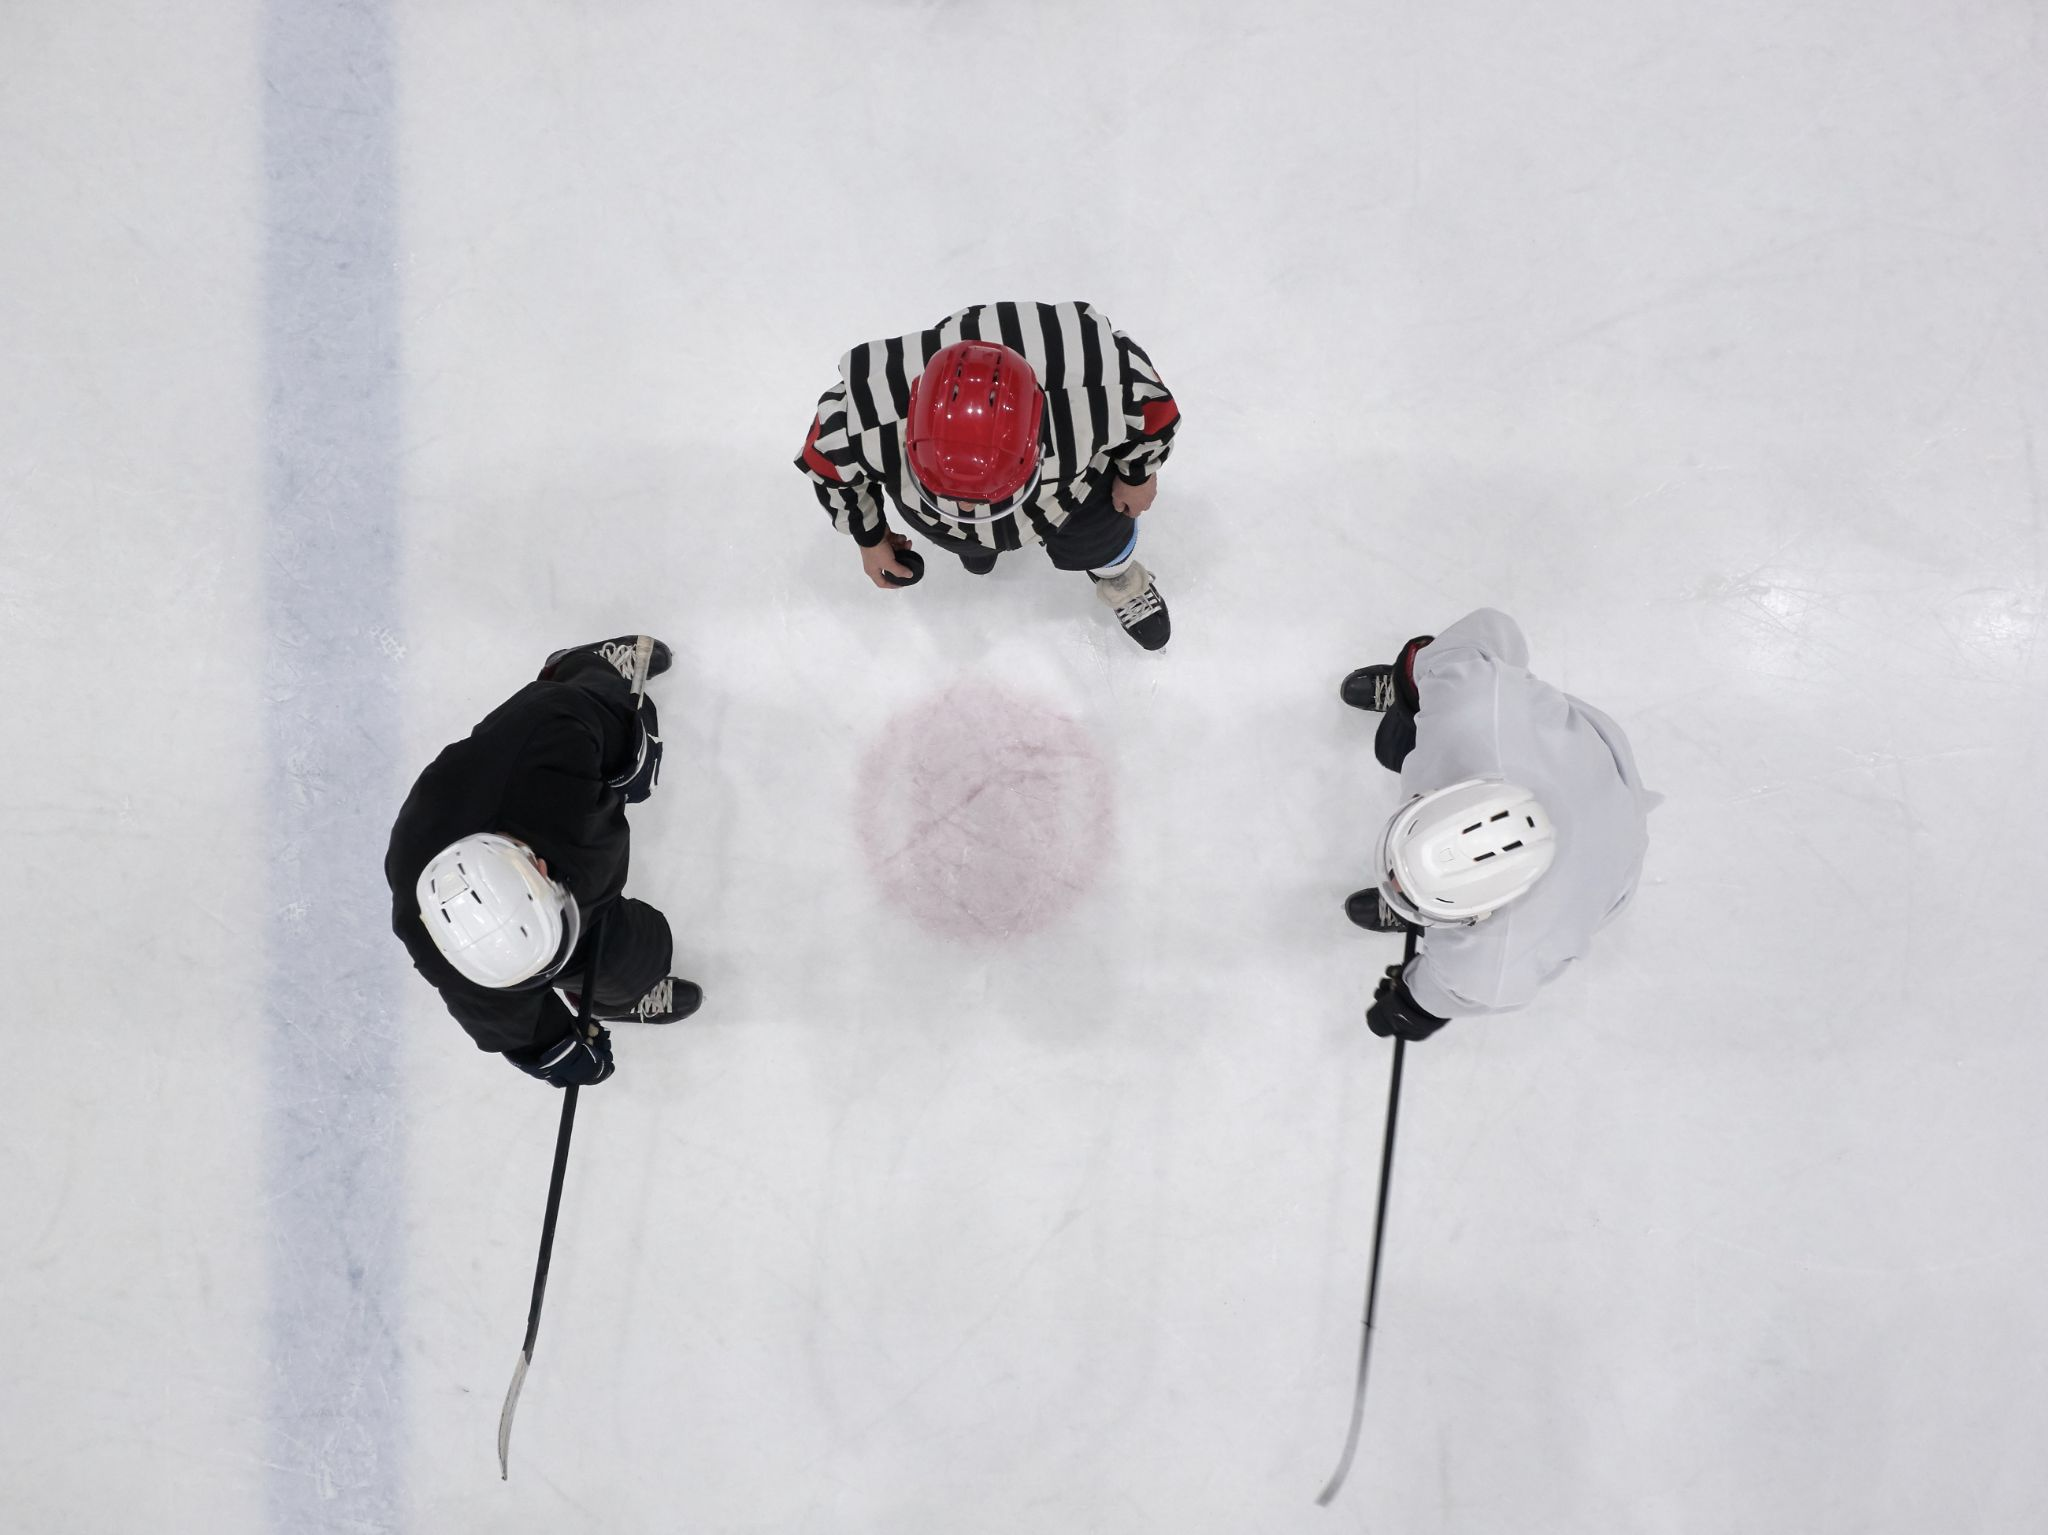 Top view of men playing ice hockey